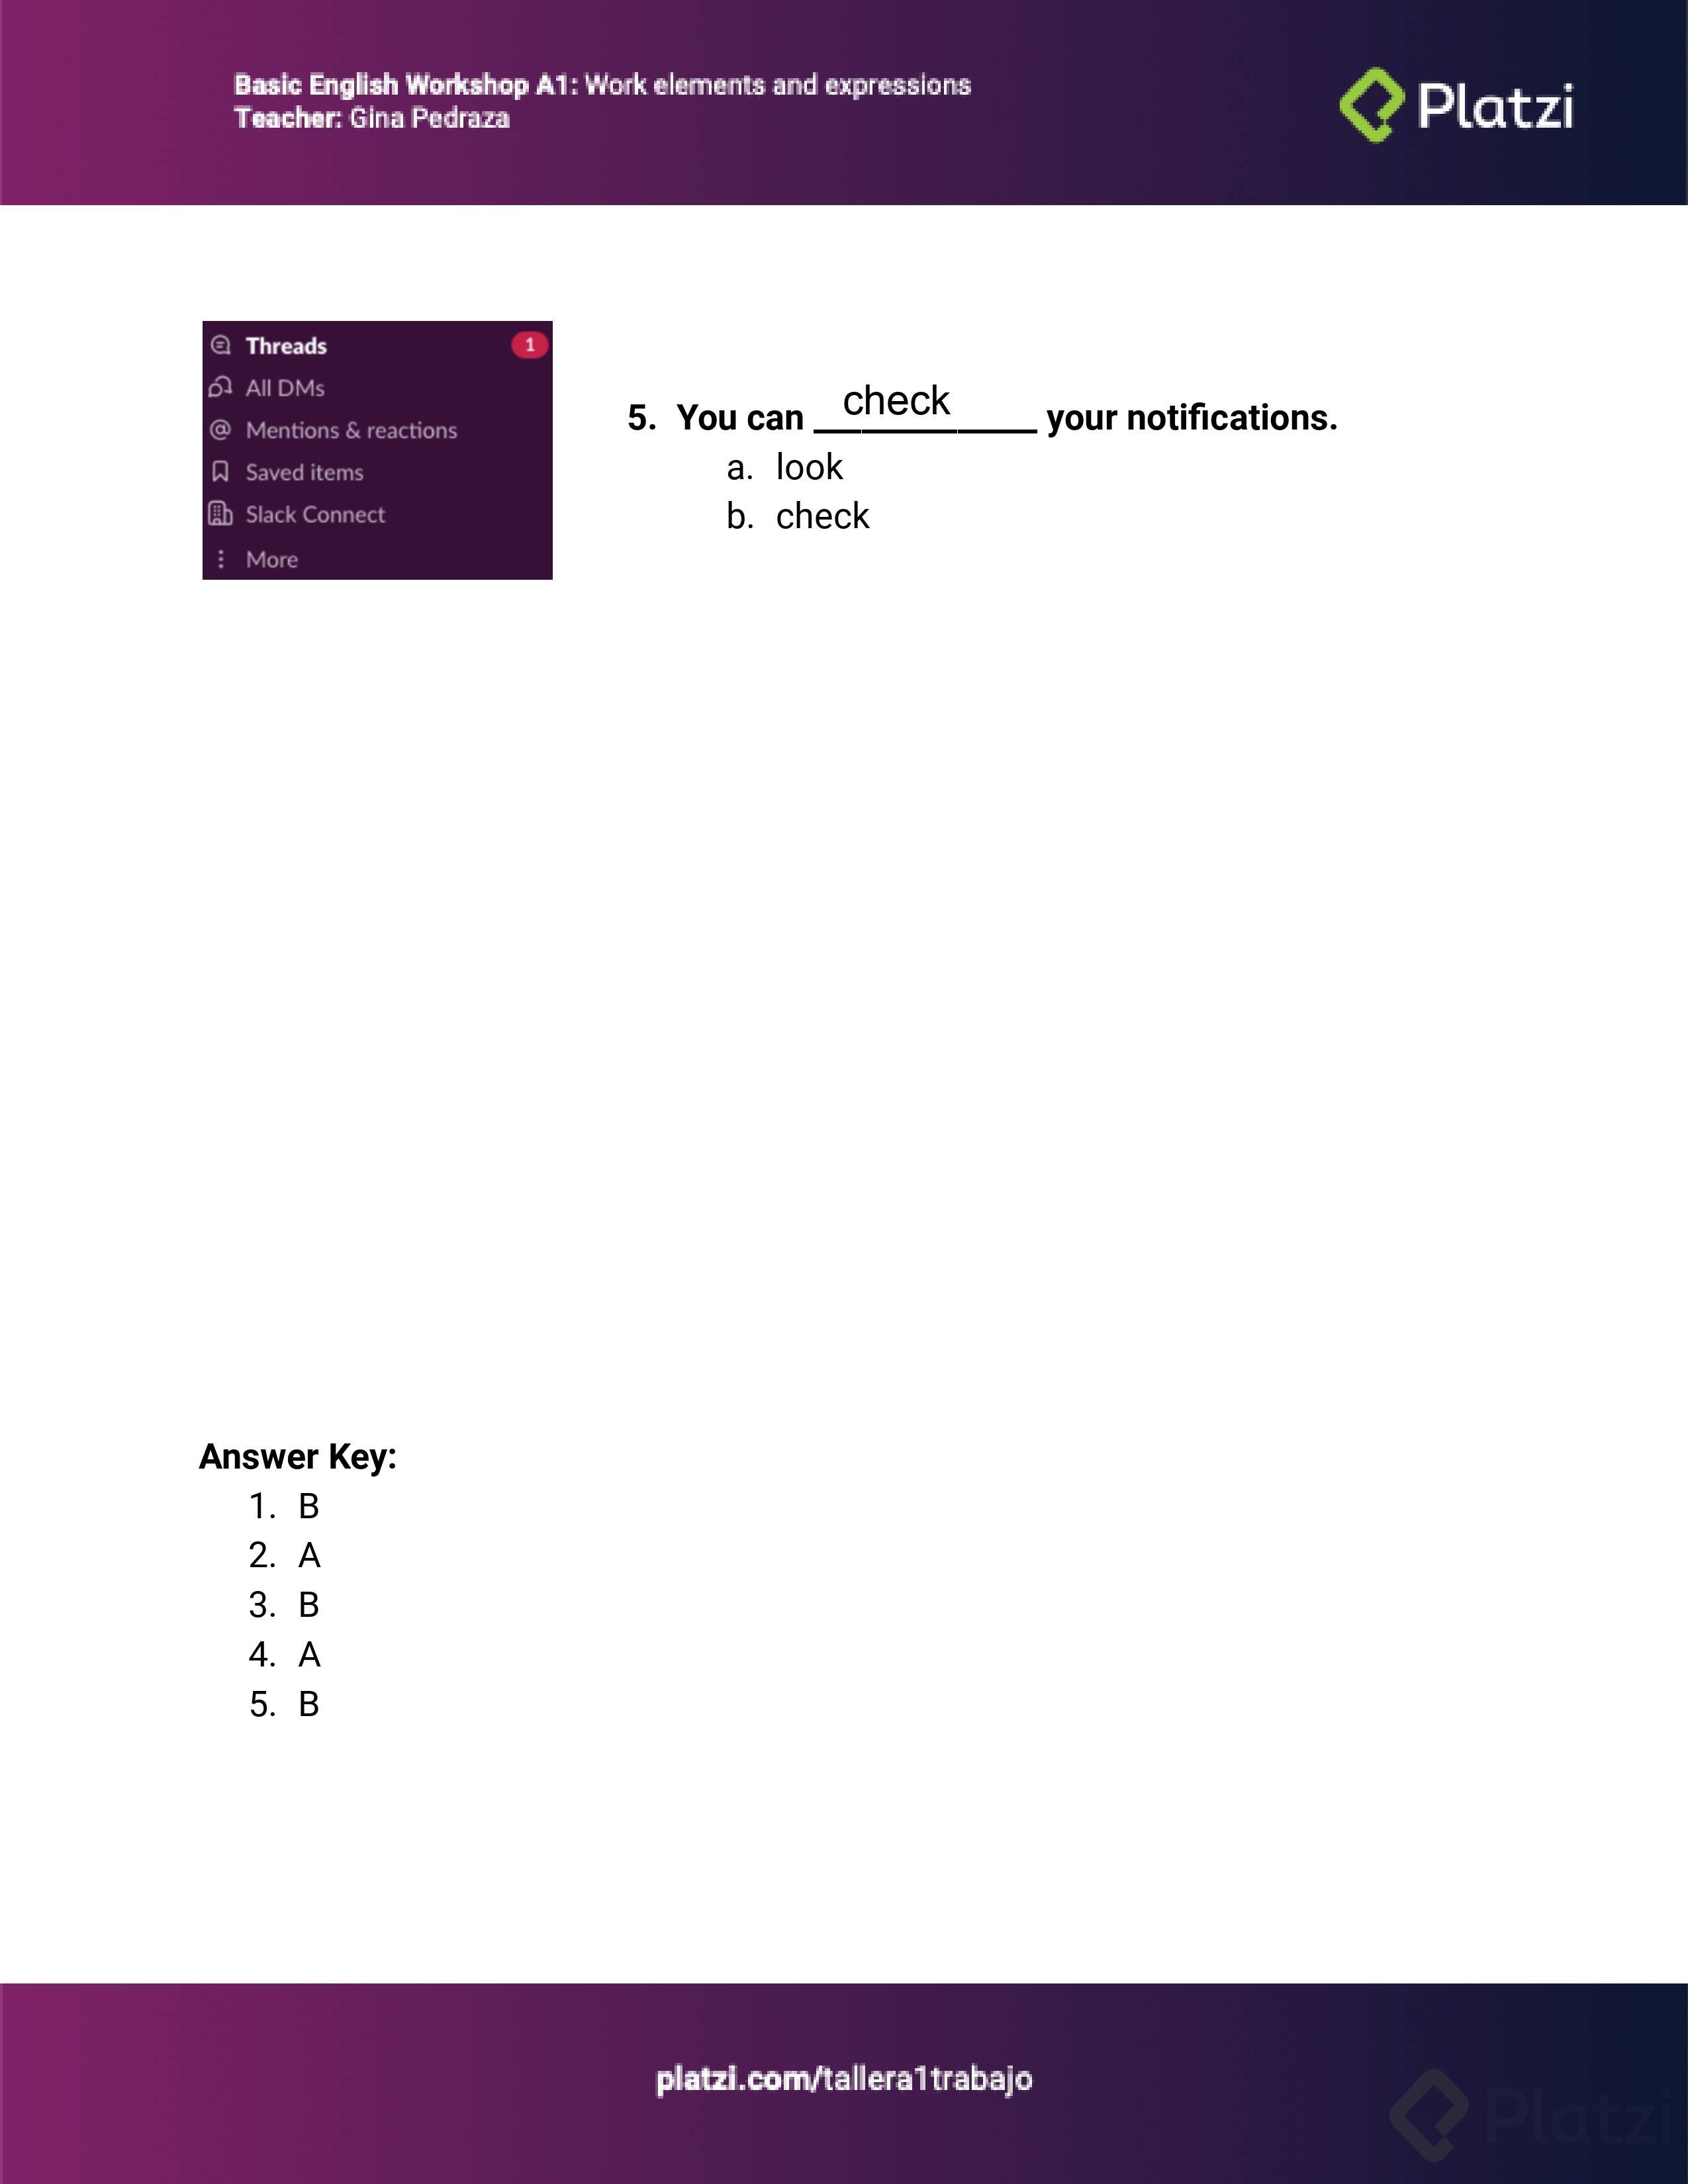 worksheet-class-3-before-you-get-started_3db20706-c981-4711-8a66-ee3faabd0697_pages-to-jpg-0002.png